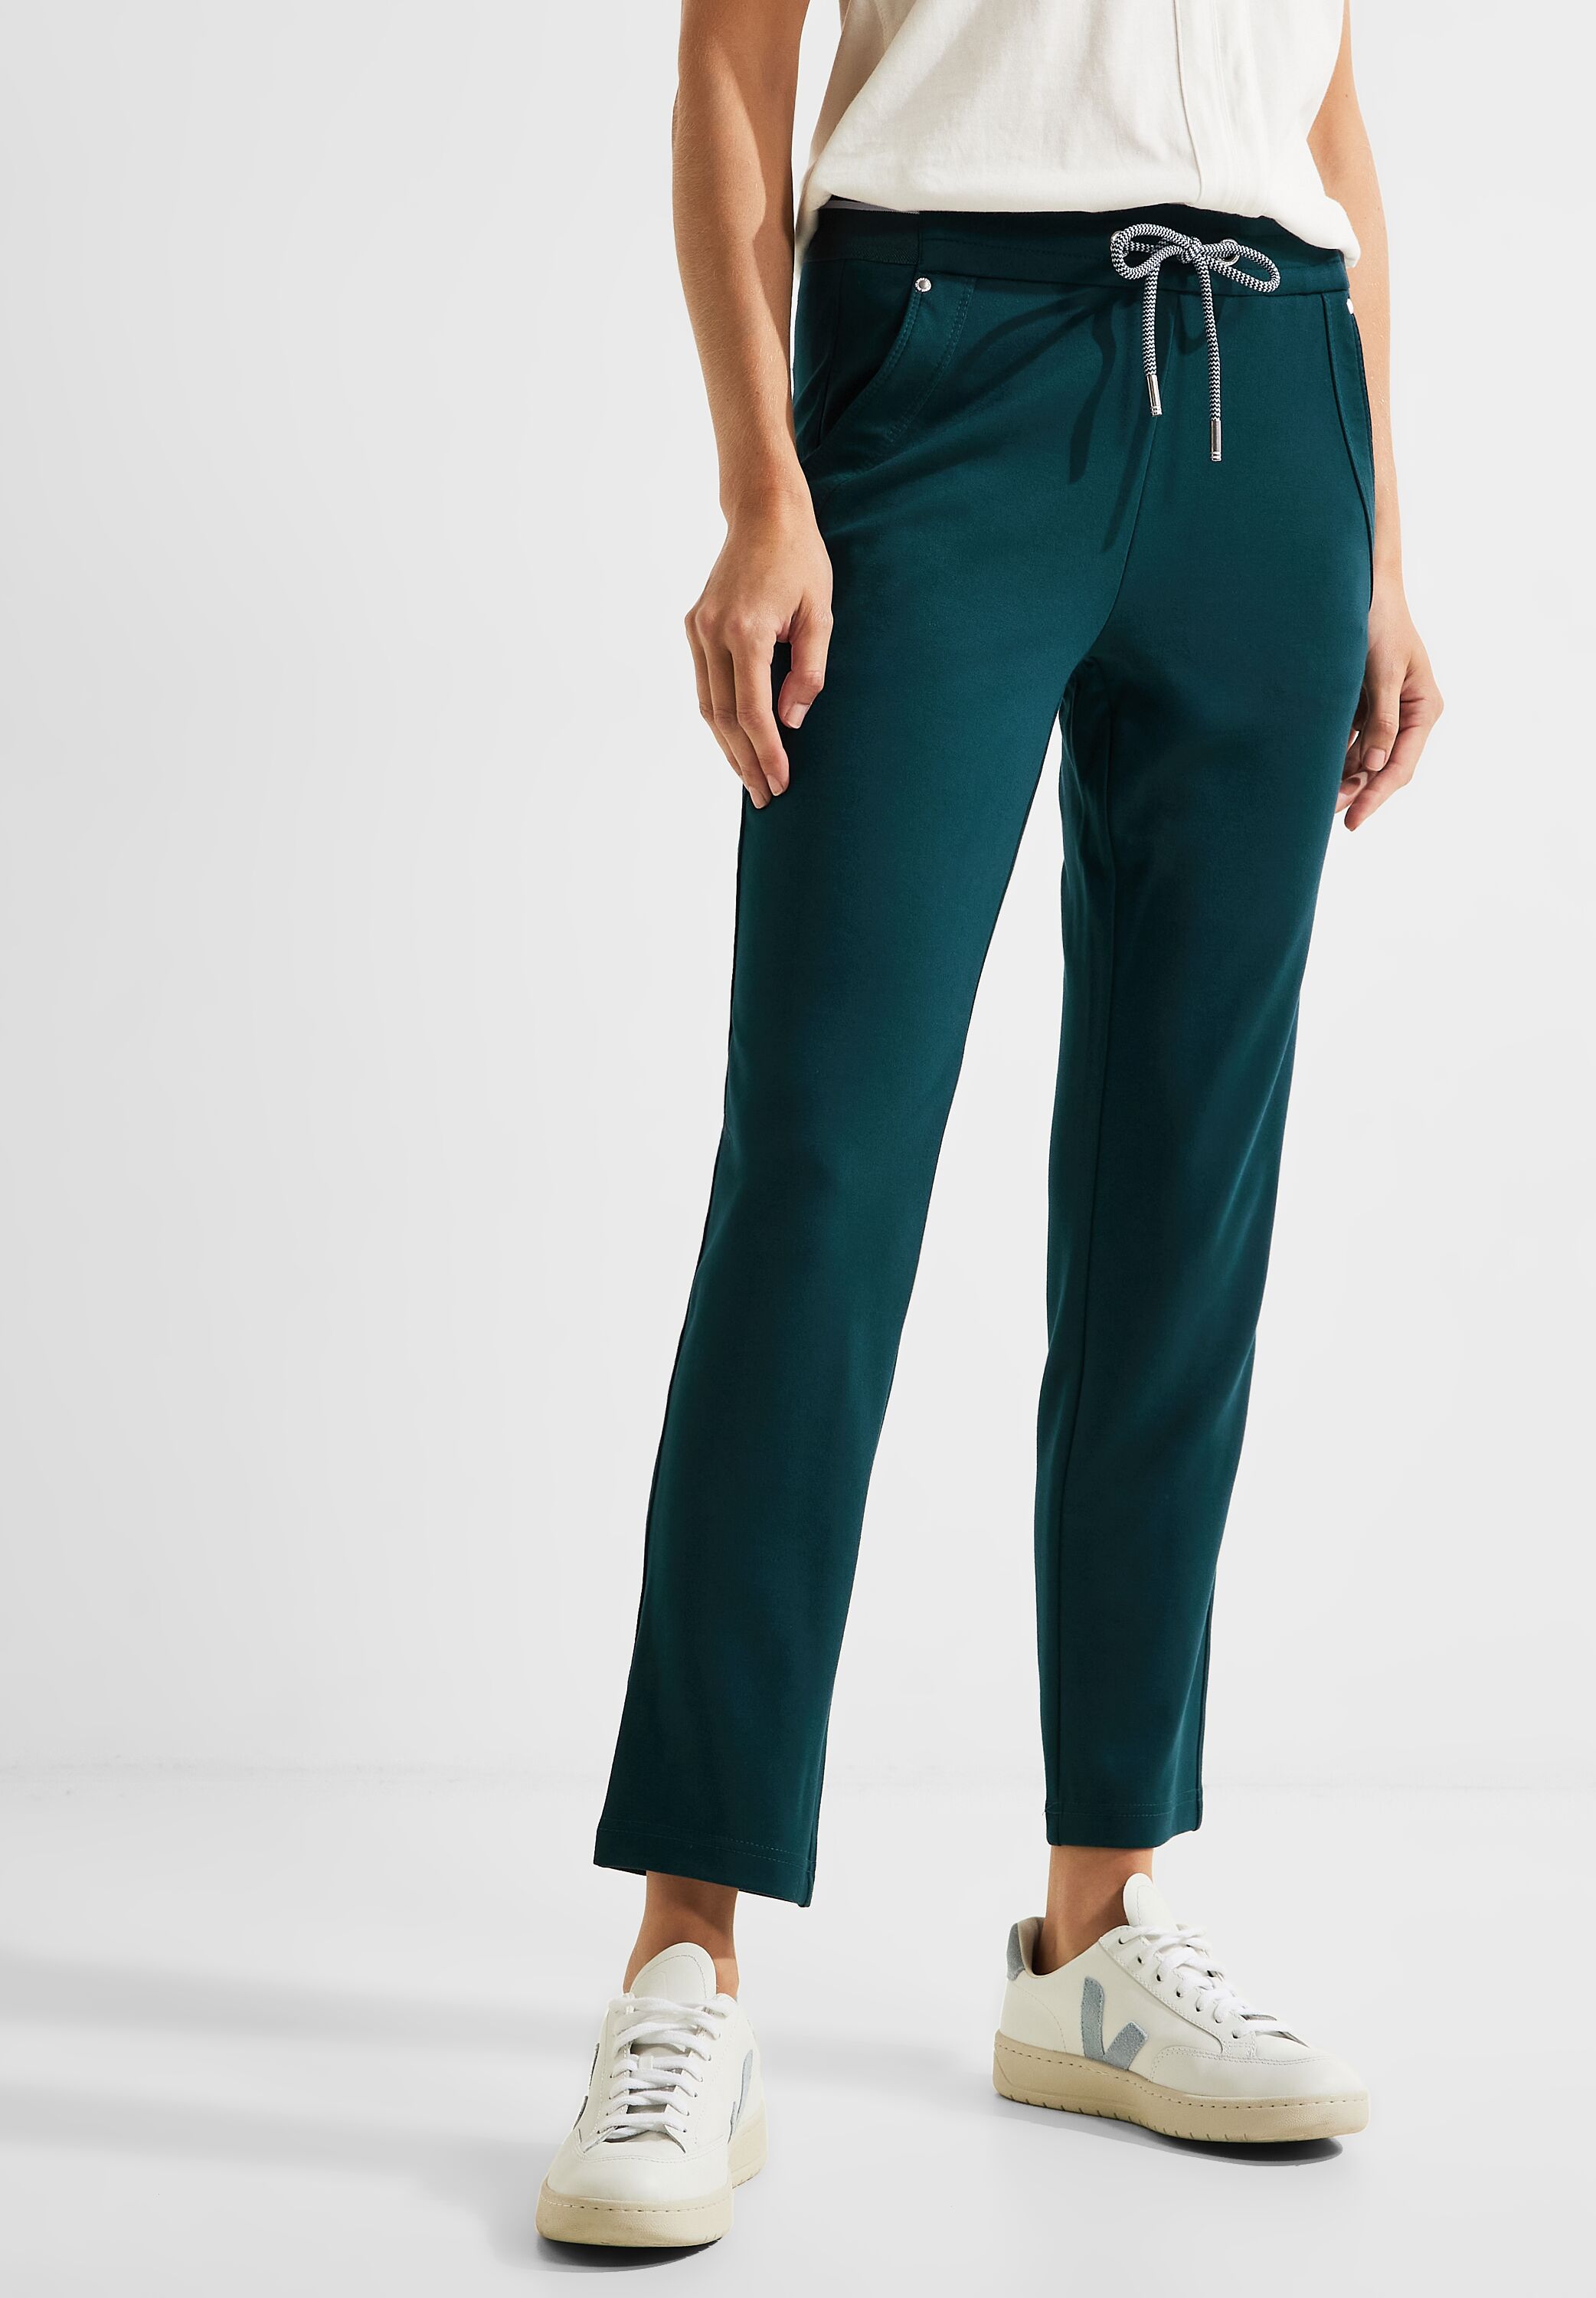 CECIL Joggpant Tracey Mode reduziert in Deep CONCEPT Green - Lake im SALE B376689-14926